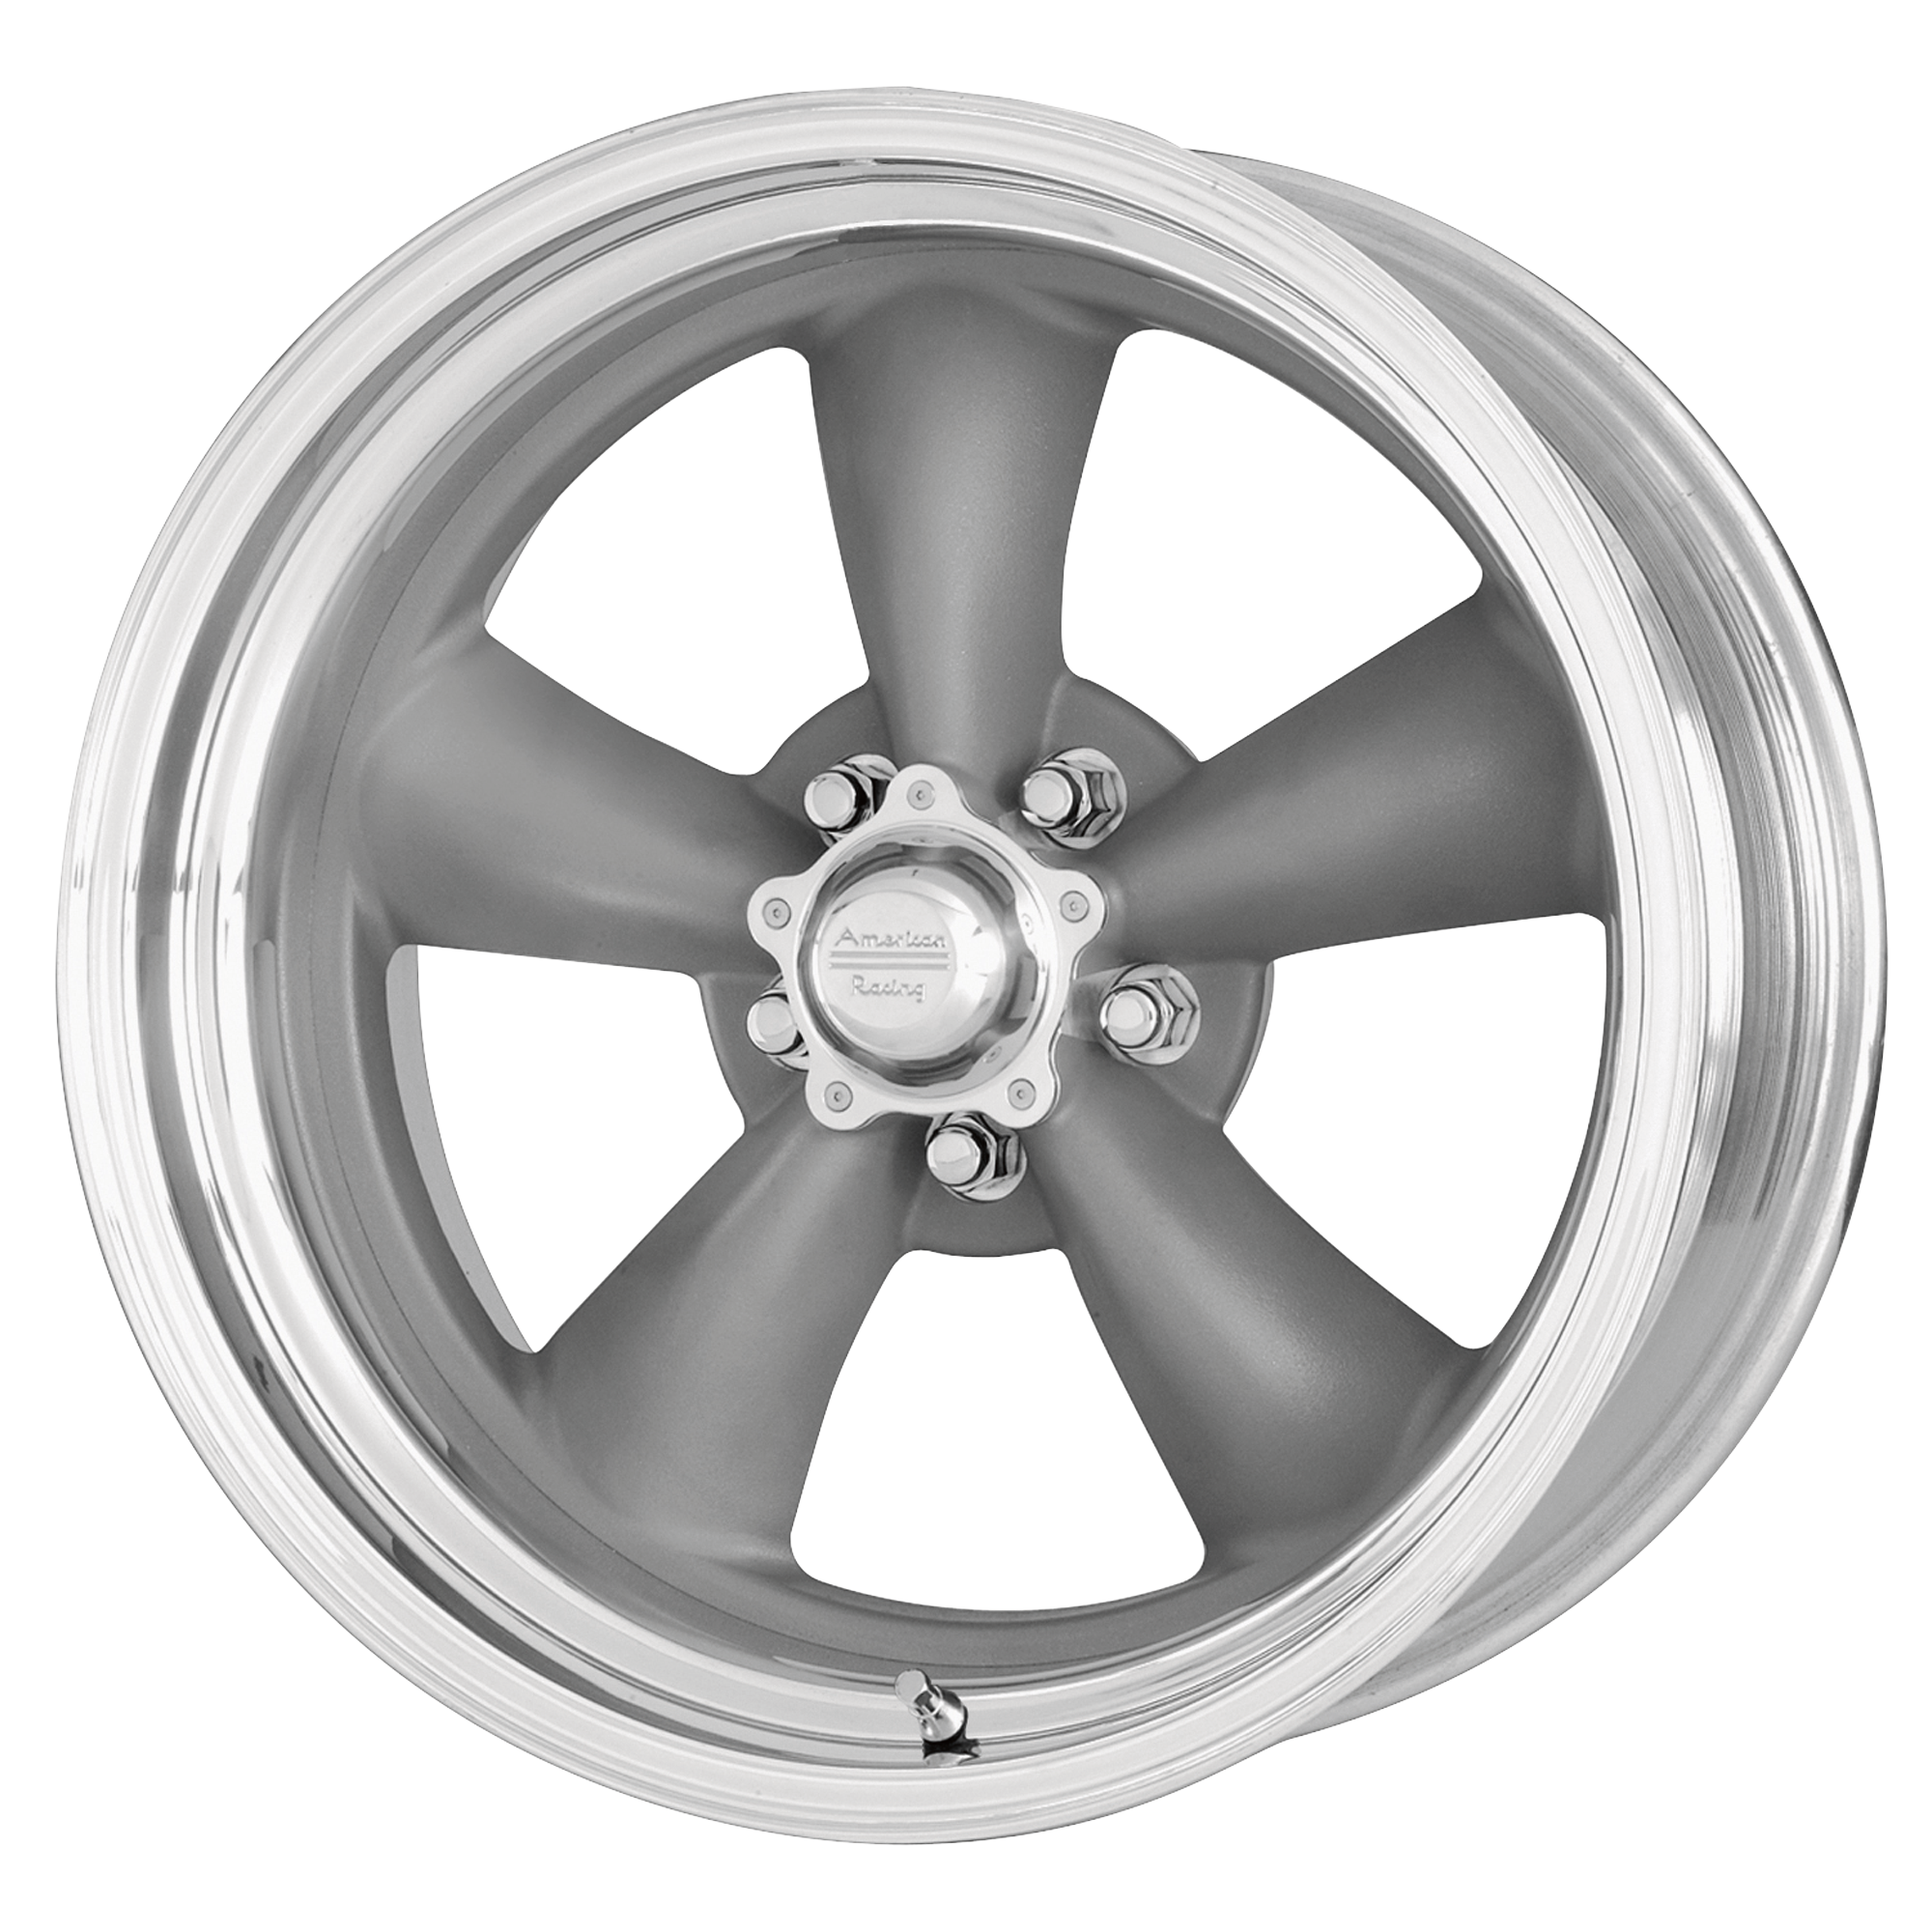 CLASSIC TORQ THRUST II ONE PIECE 17x7 5x120.65 MAG GRAY W/ MACHINED LIP (0 mm) - Tires and Engine Performance